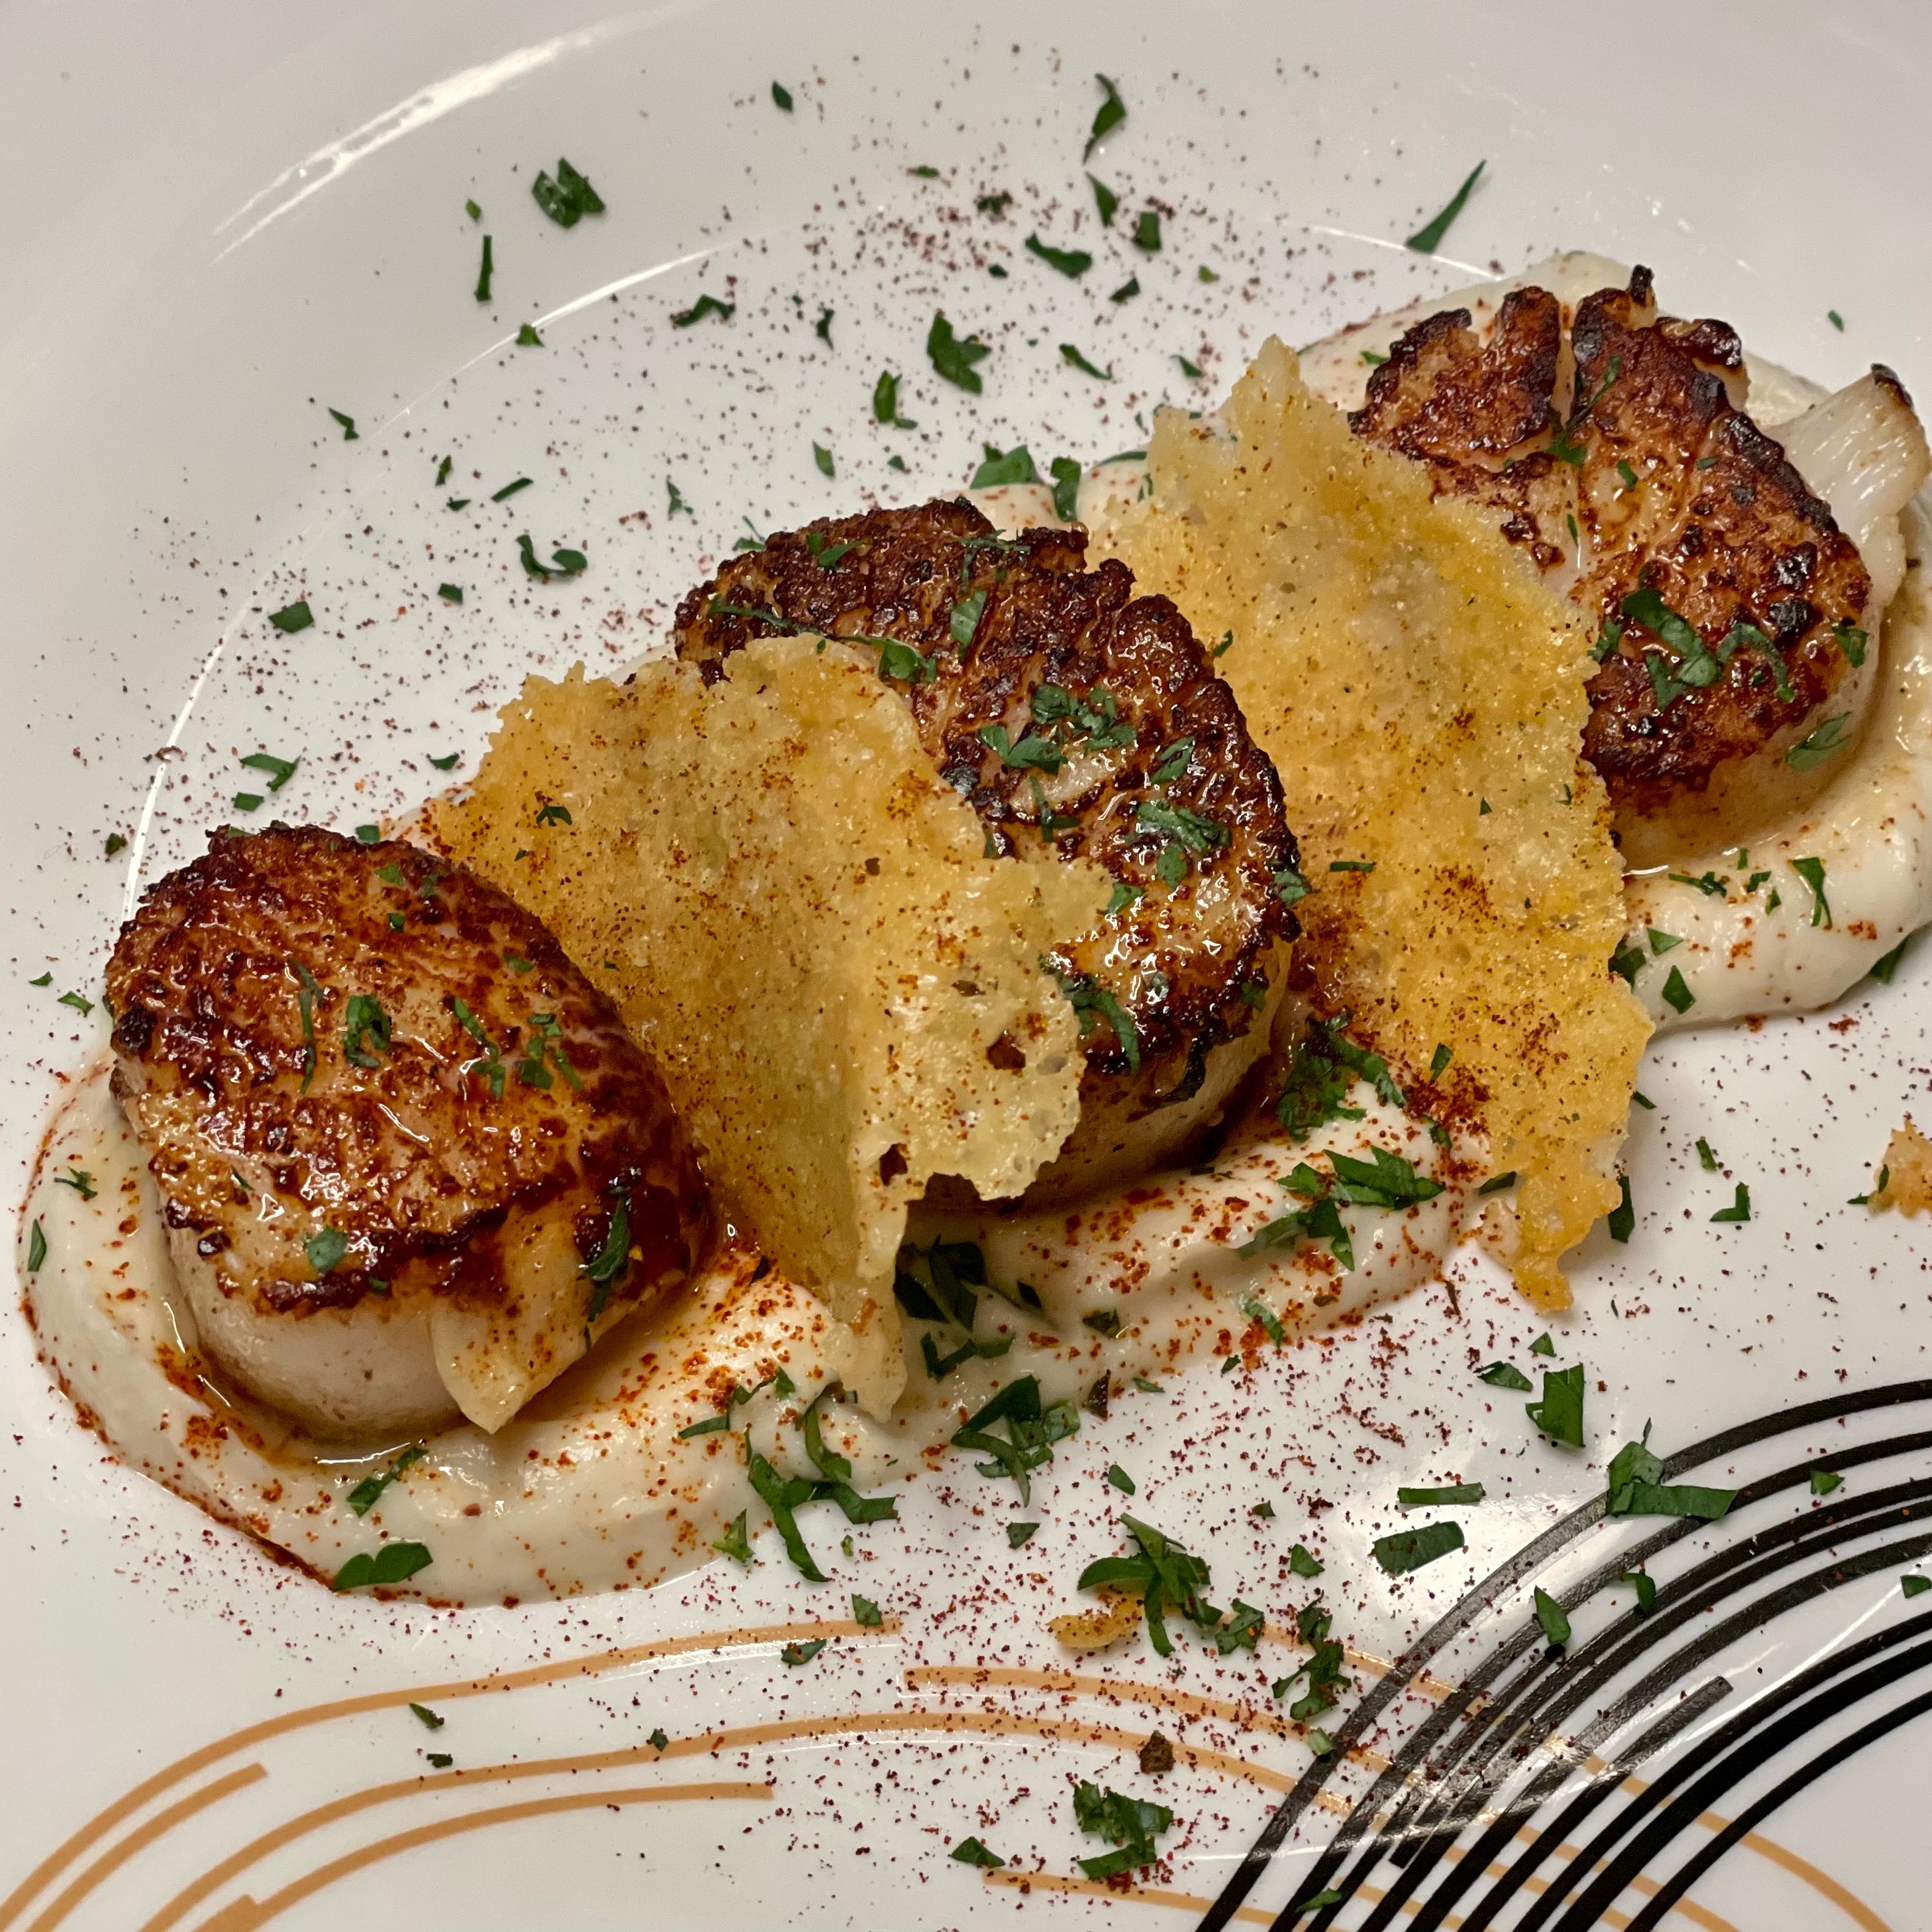 Plate cauliflower cream then put scallops on top. Finish with chopped parsley or another herb and a parmesan frico, made by putting grated parm in a pan until in browns and hardens. Sprinkle some paprika or sumac for color. 
